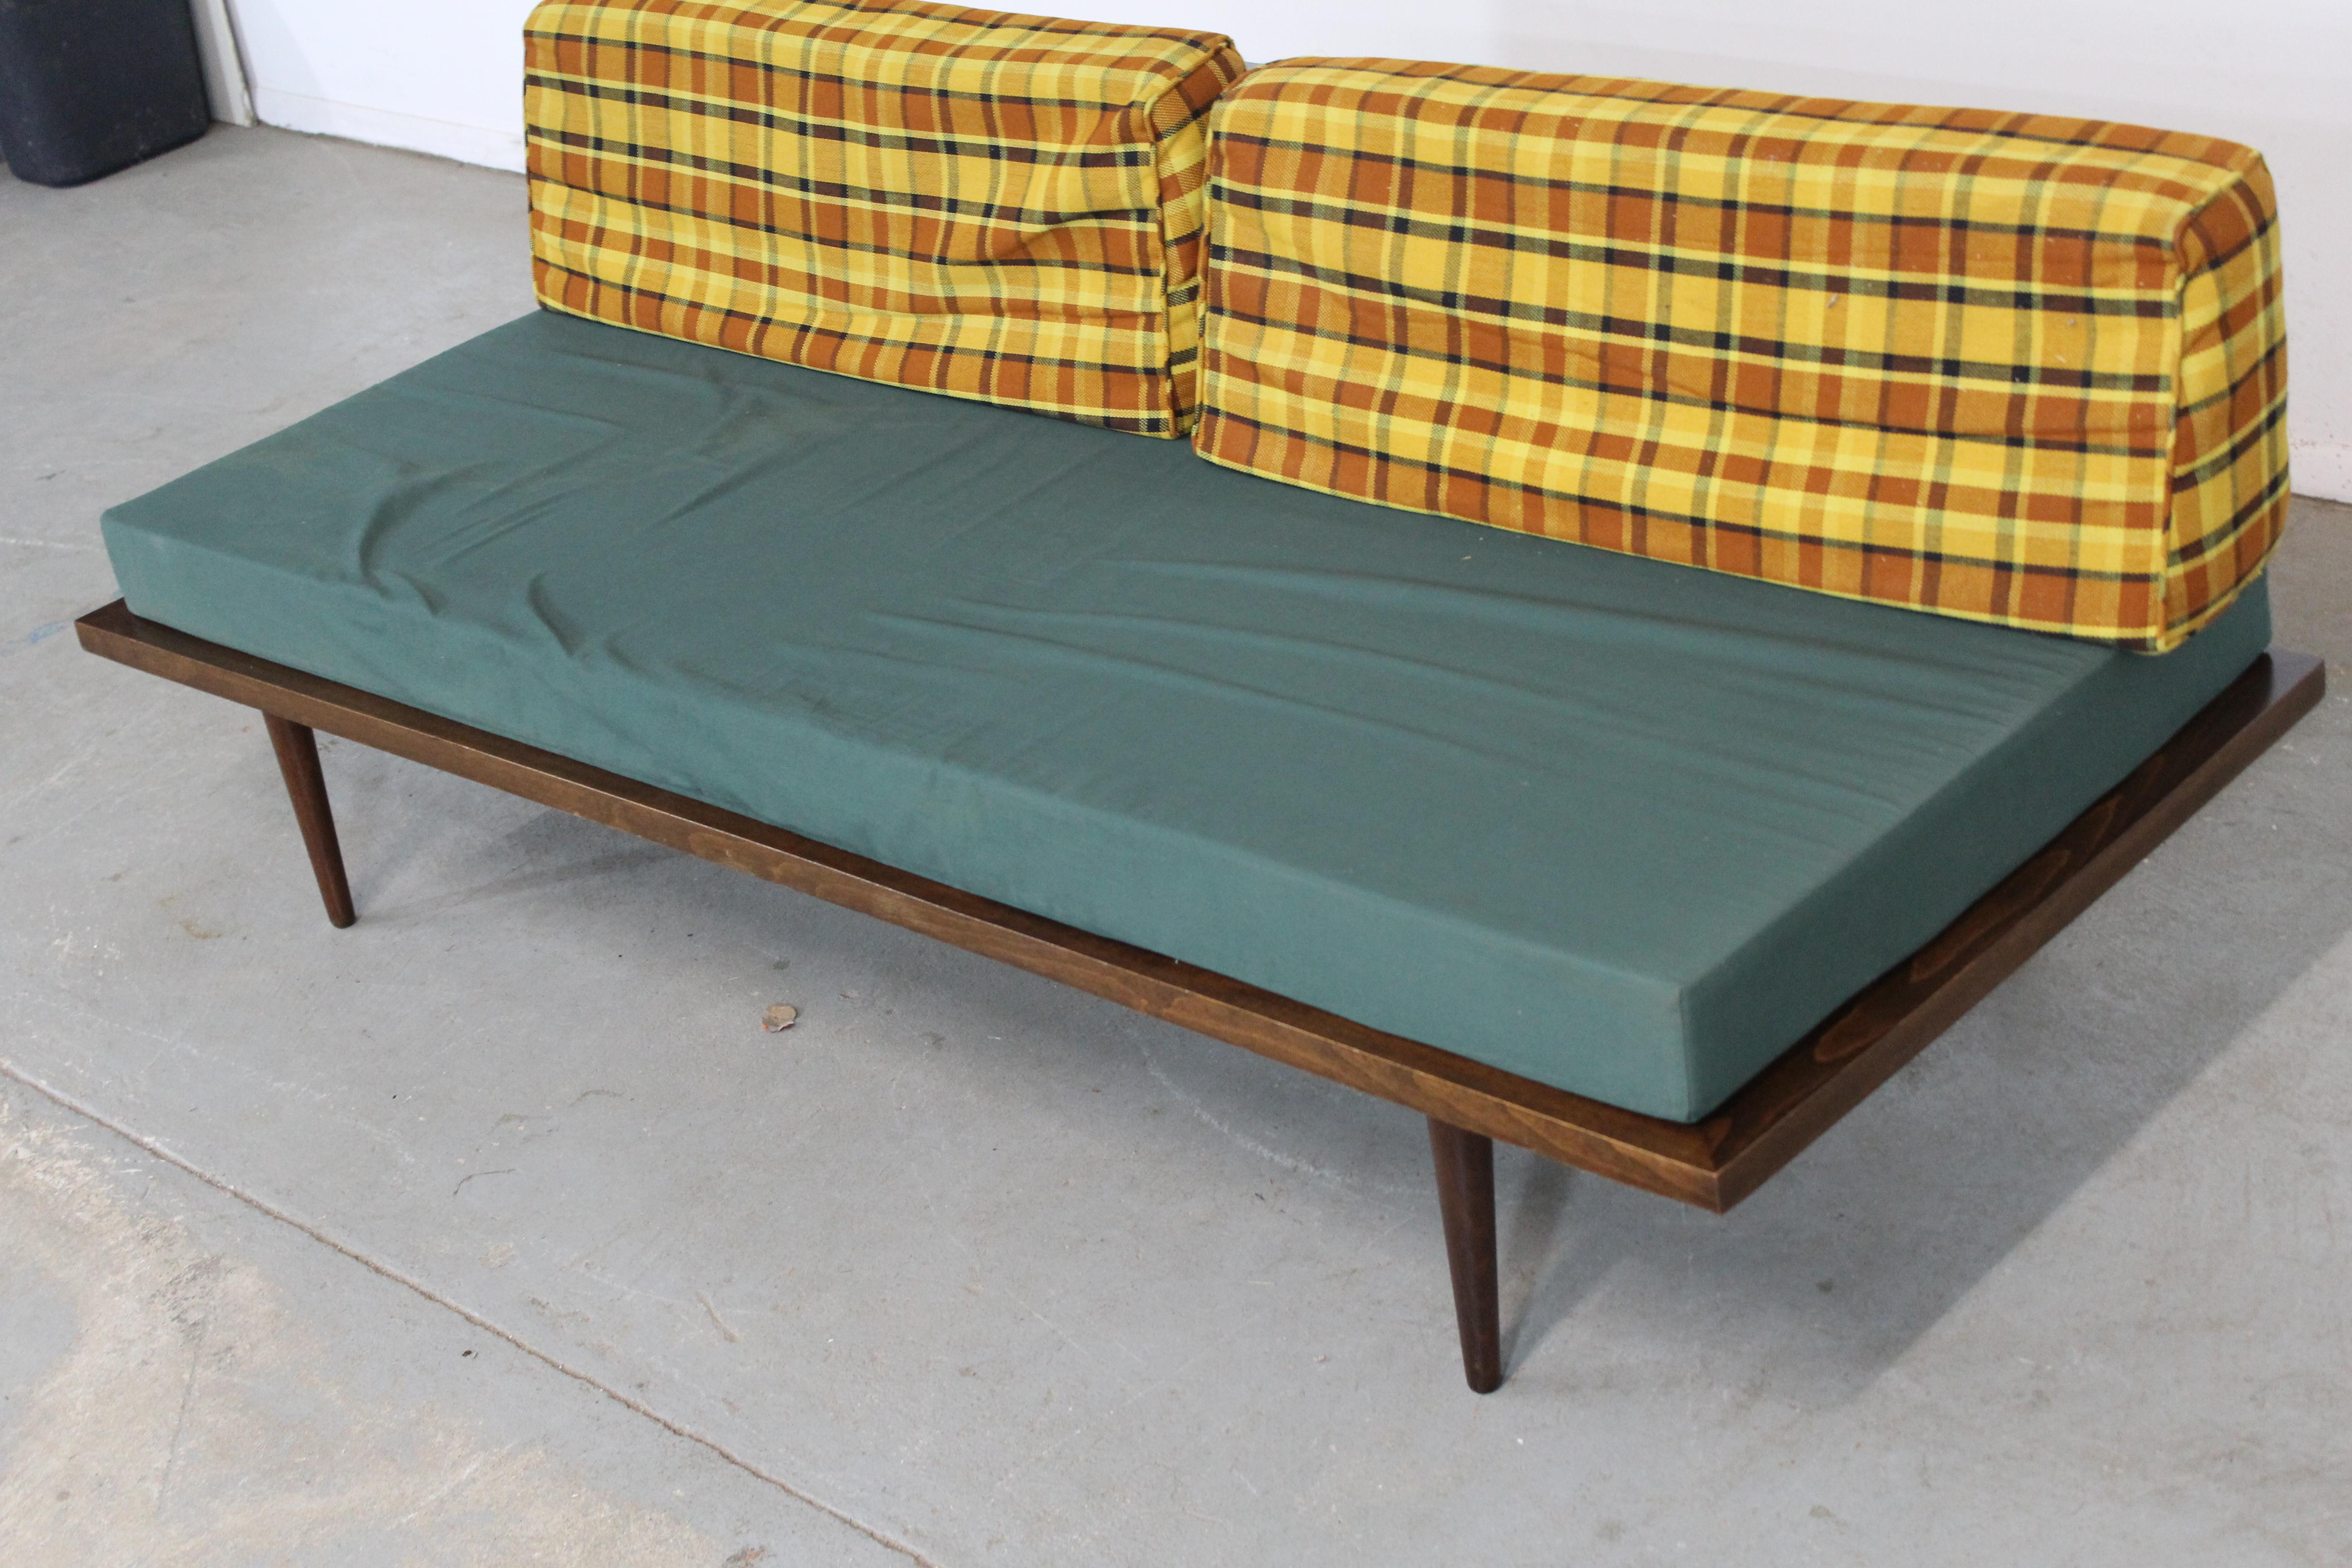 20th Century Mid-Century Modern Walnut Daybed / Sofa on Pencil Legs For Sale